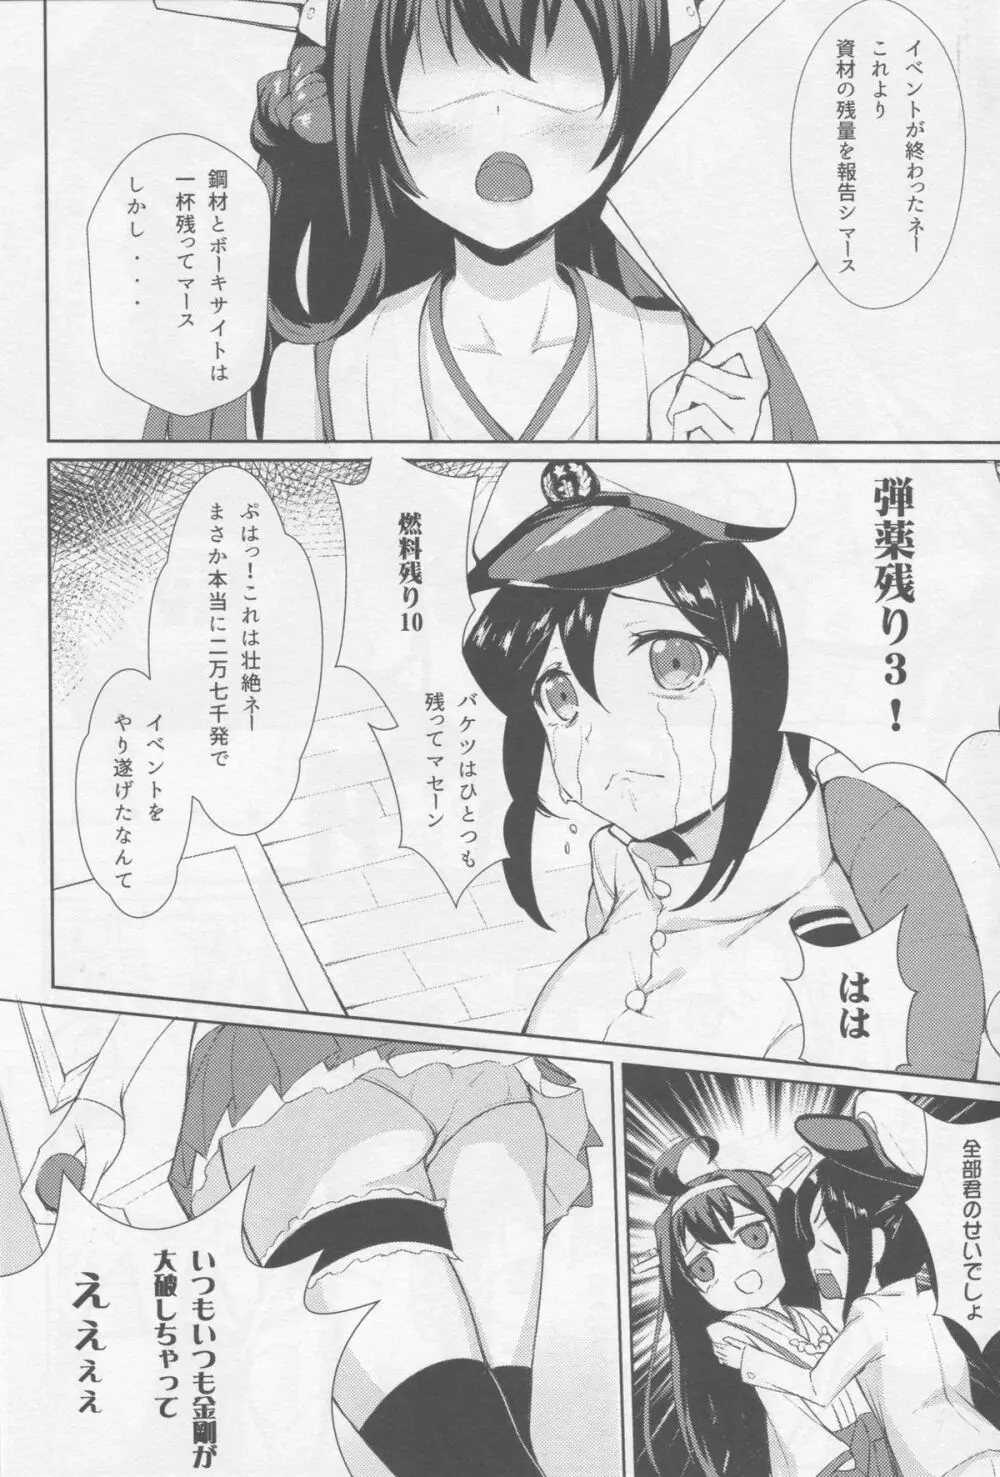 Employmentかも? - page2